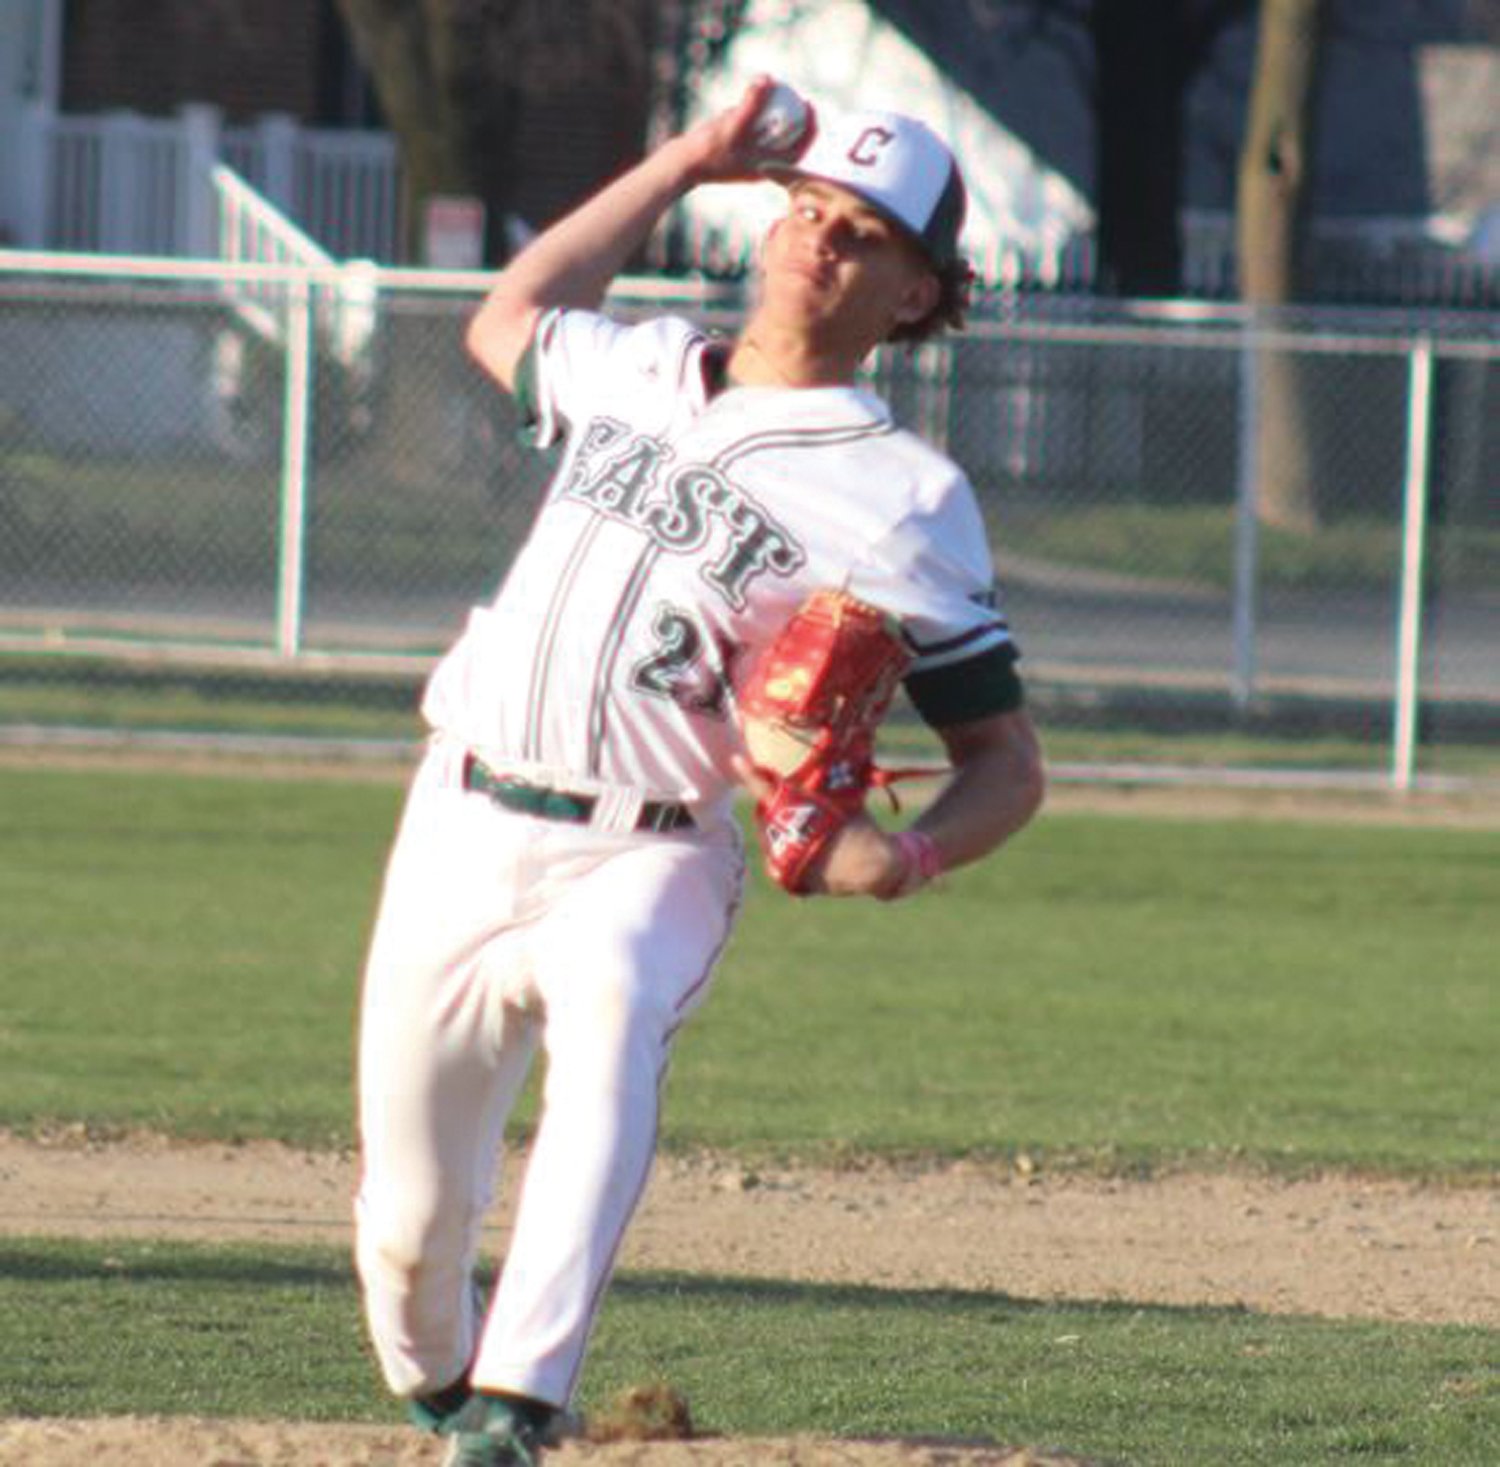 IN RELIEF: Cranston East pitcher Randy Guzman delivers a pitch.